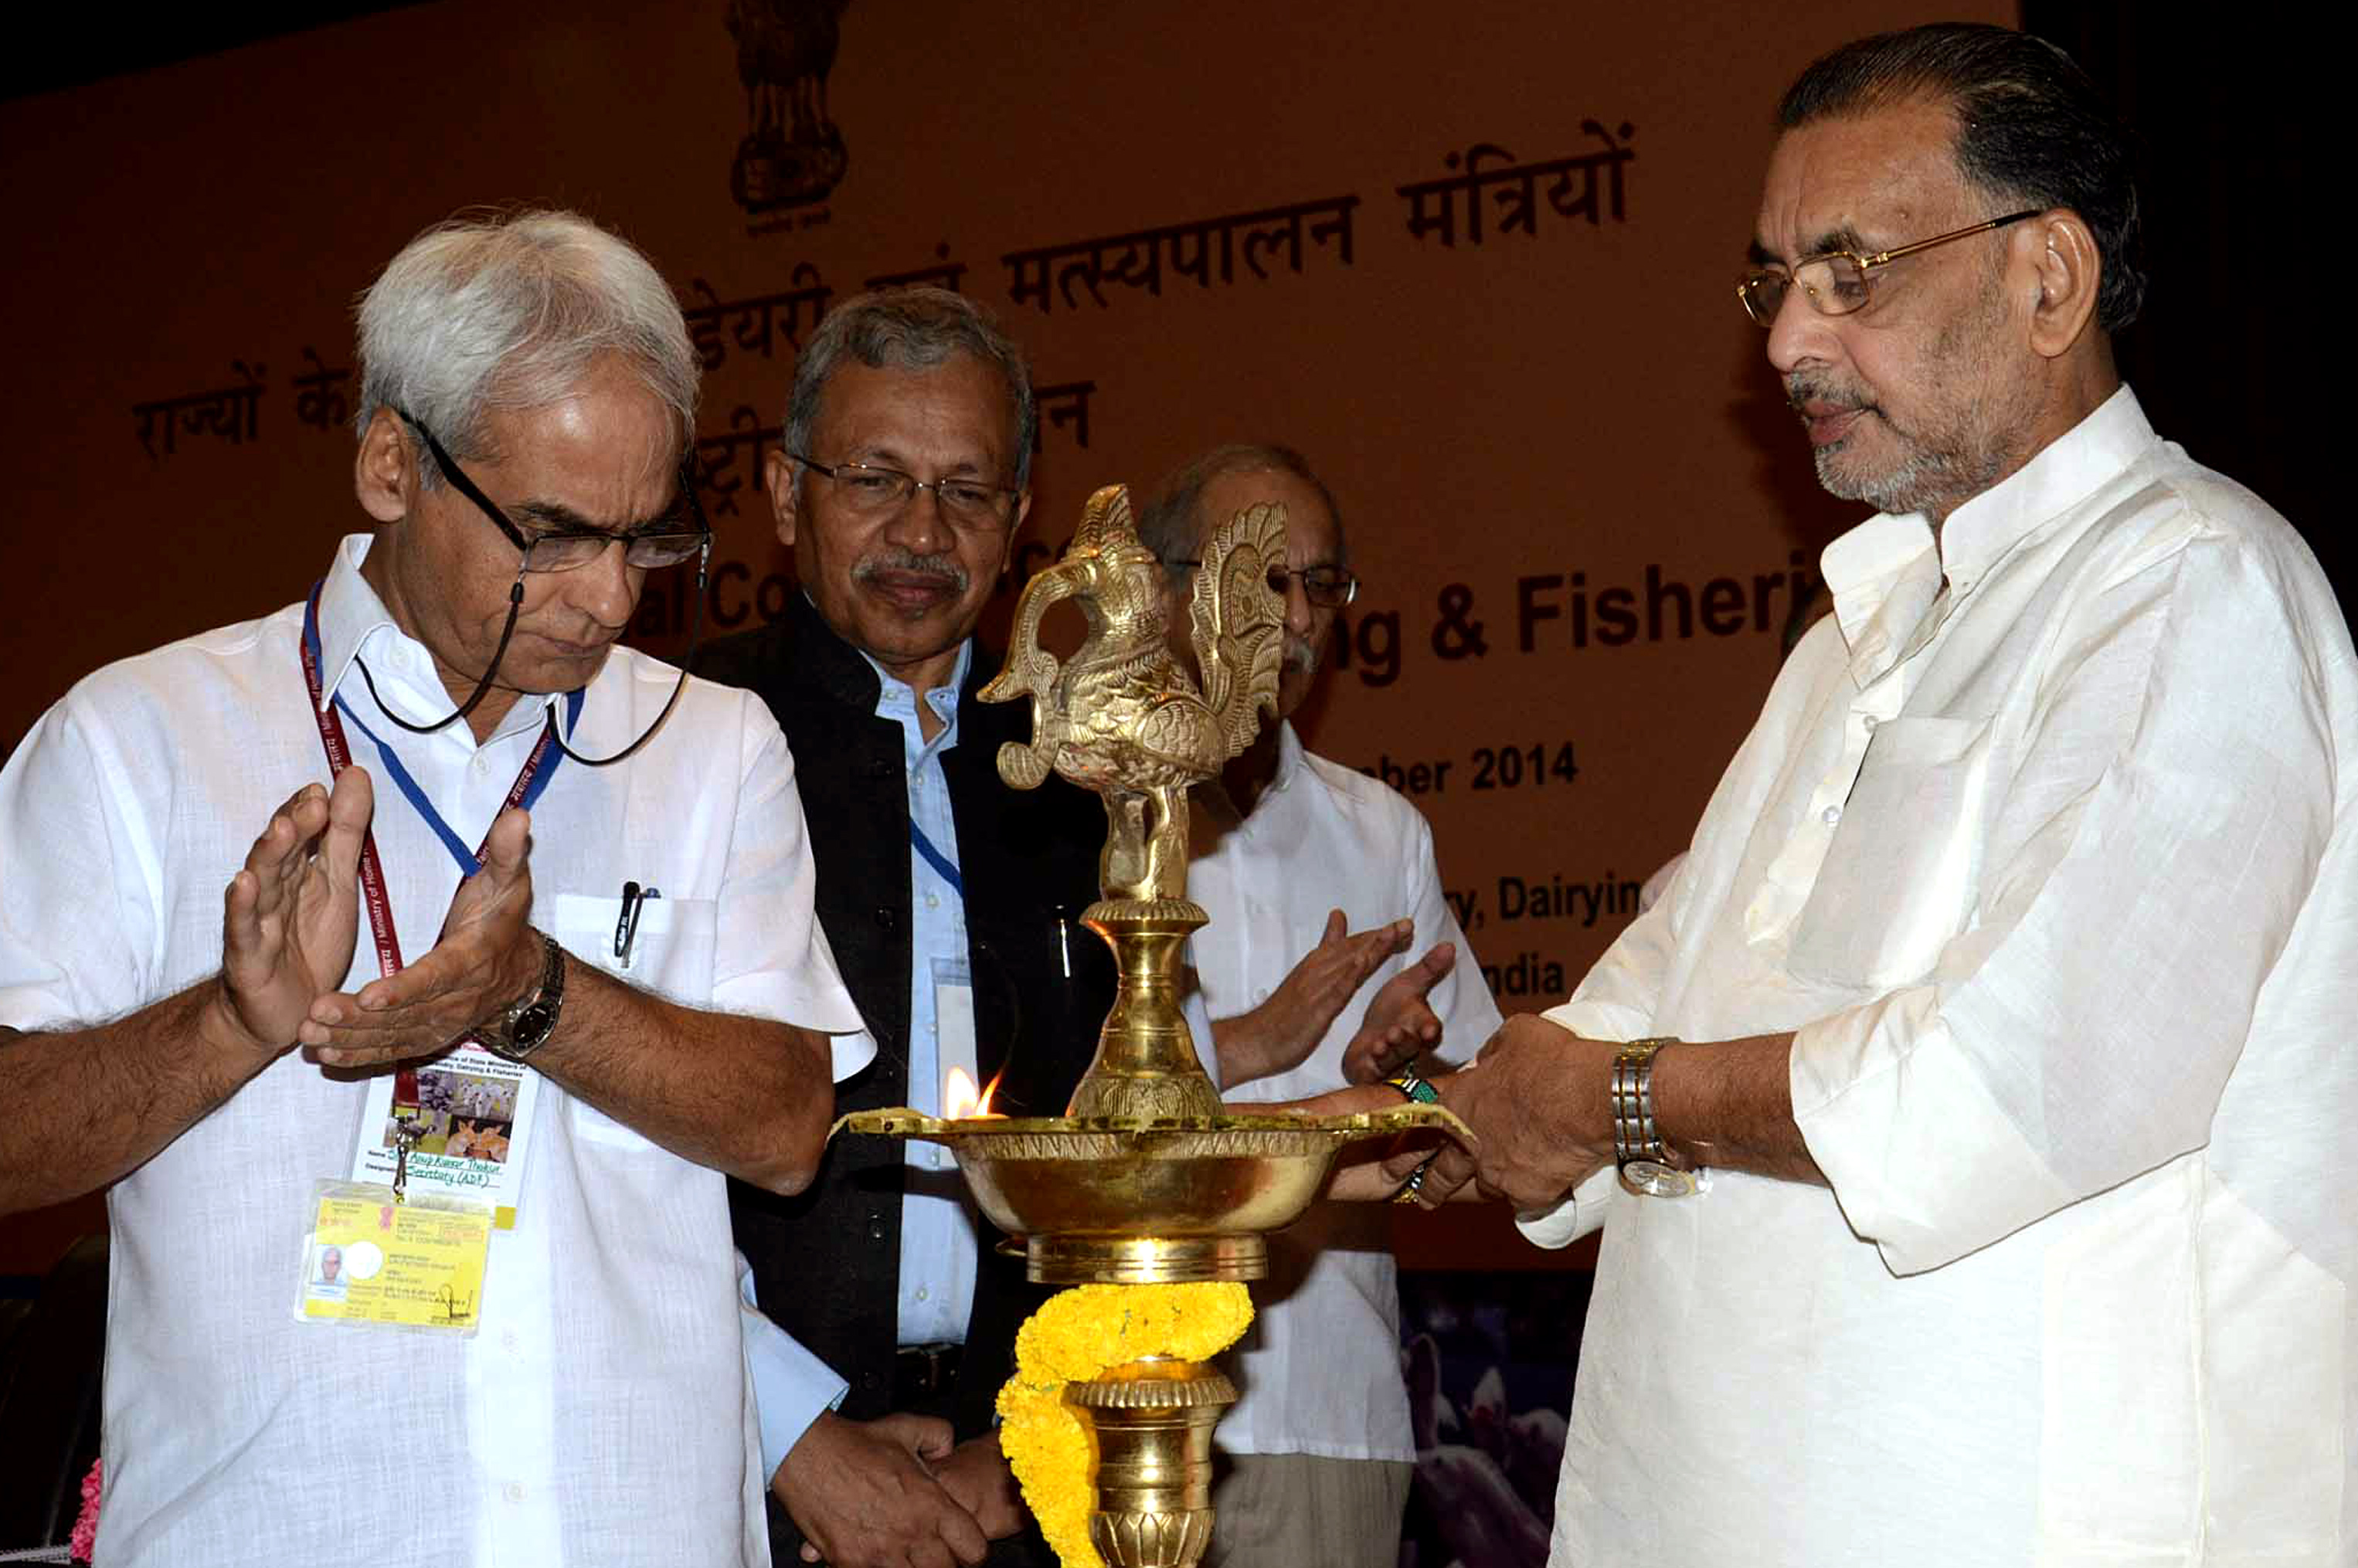 Radha Mohan Singh inauguration of the National Conference of State Ministers of Animal Husbandry.